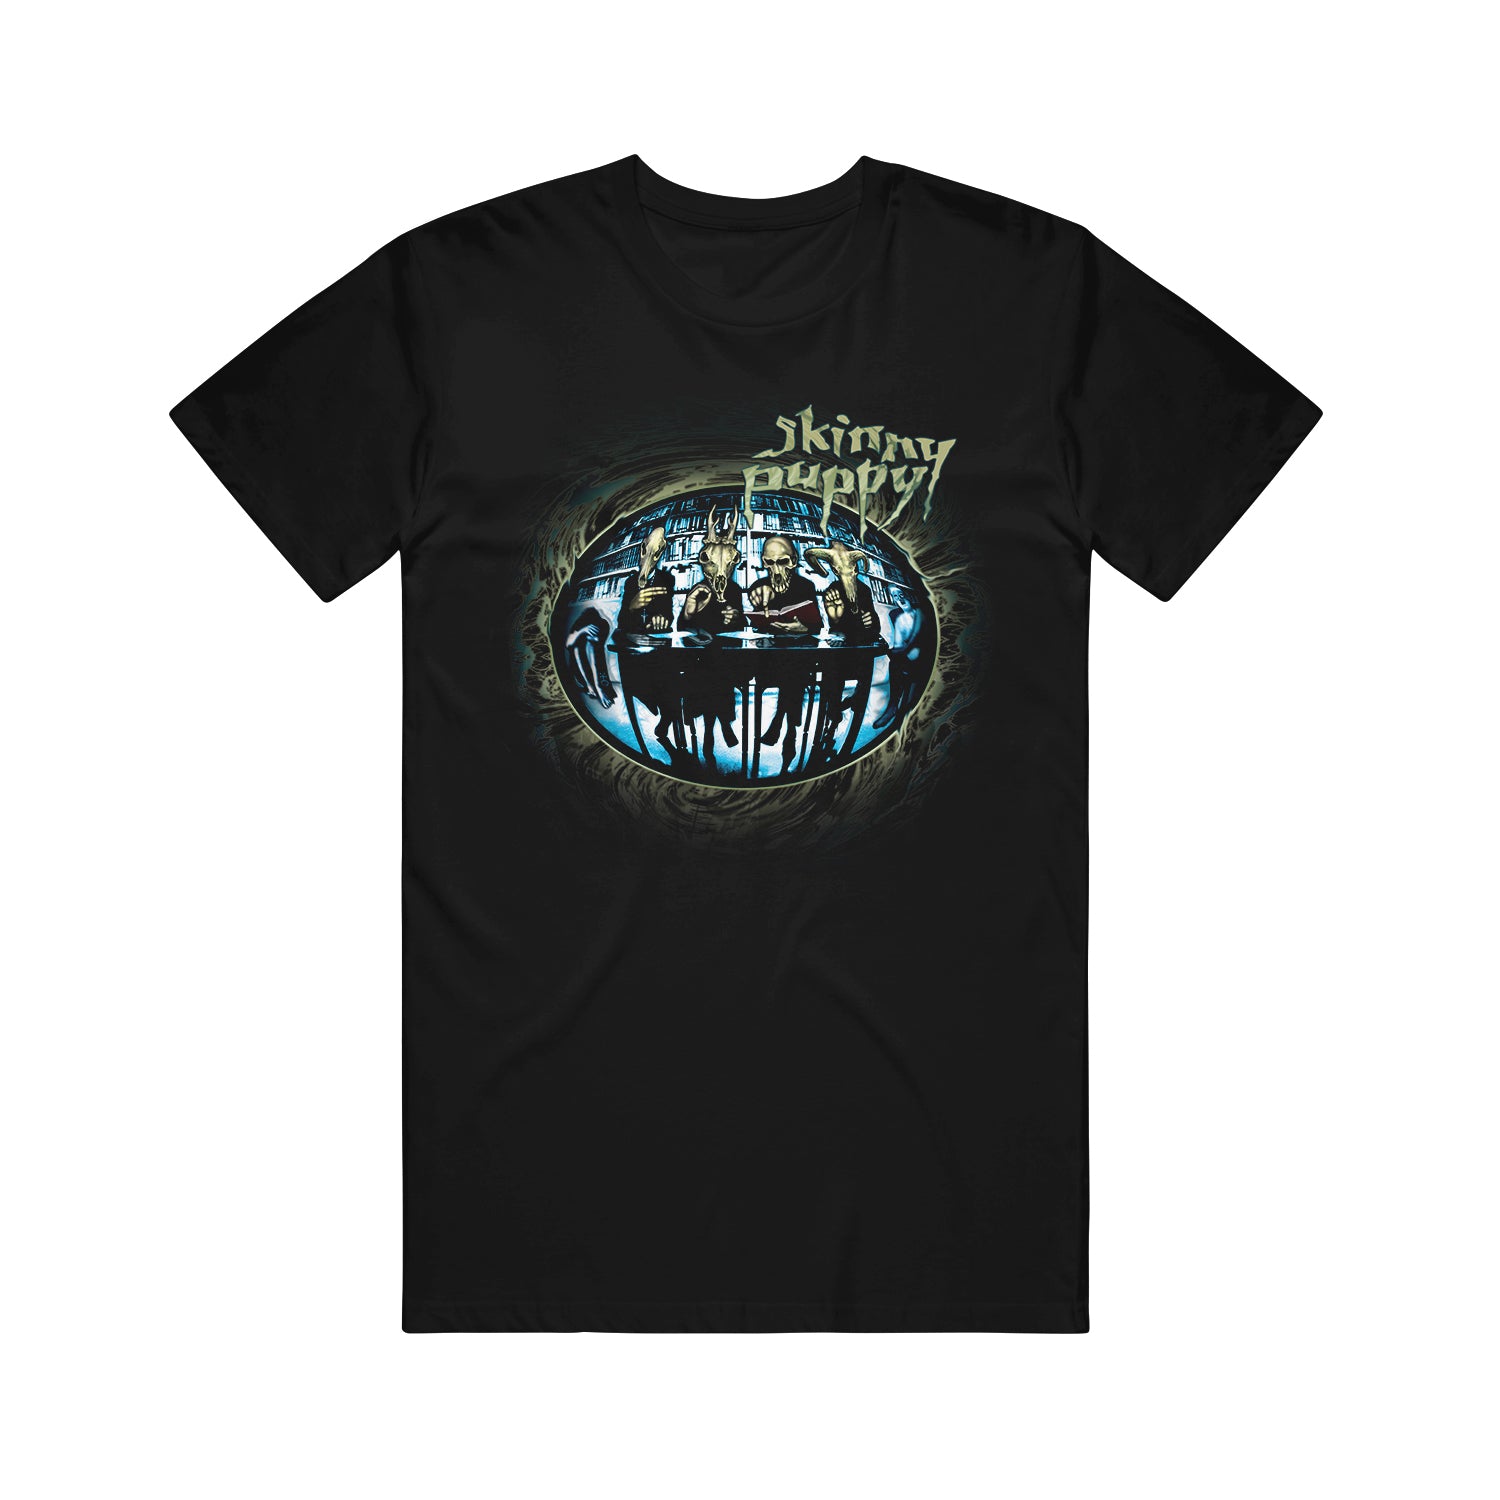 Image of the front of a black tshirt on a white background. The front of the shirt features the words skinny puppy in a blue gray letter. Below that is a circle, and inside that circle are 4 people sitting at a table with animal masks on.